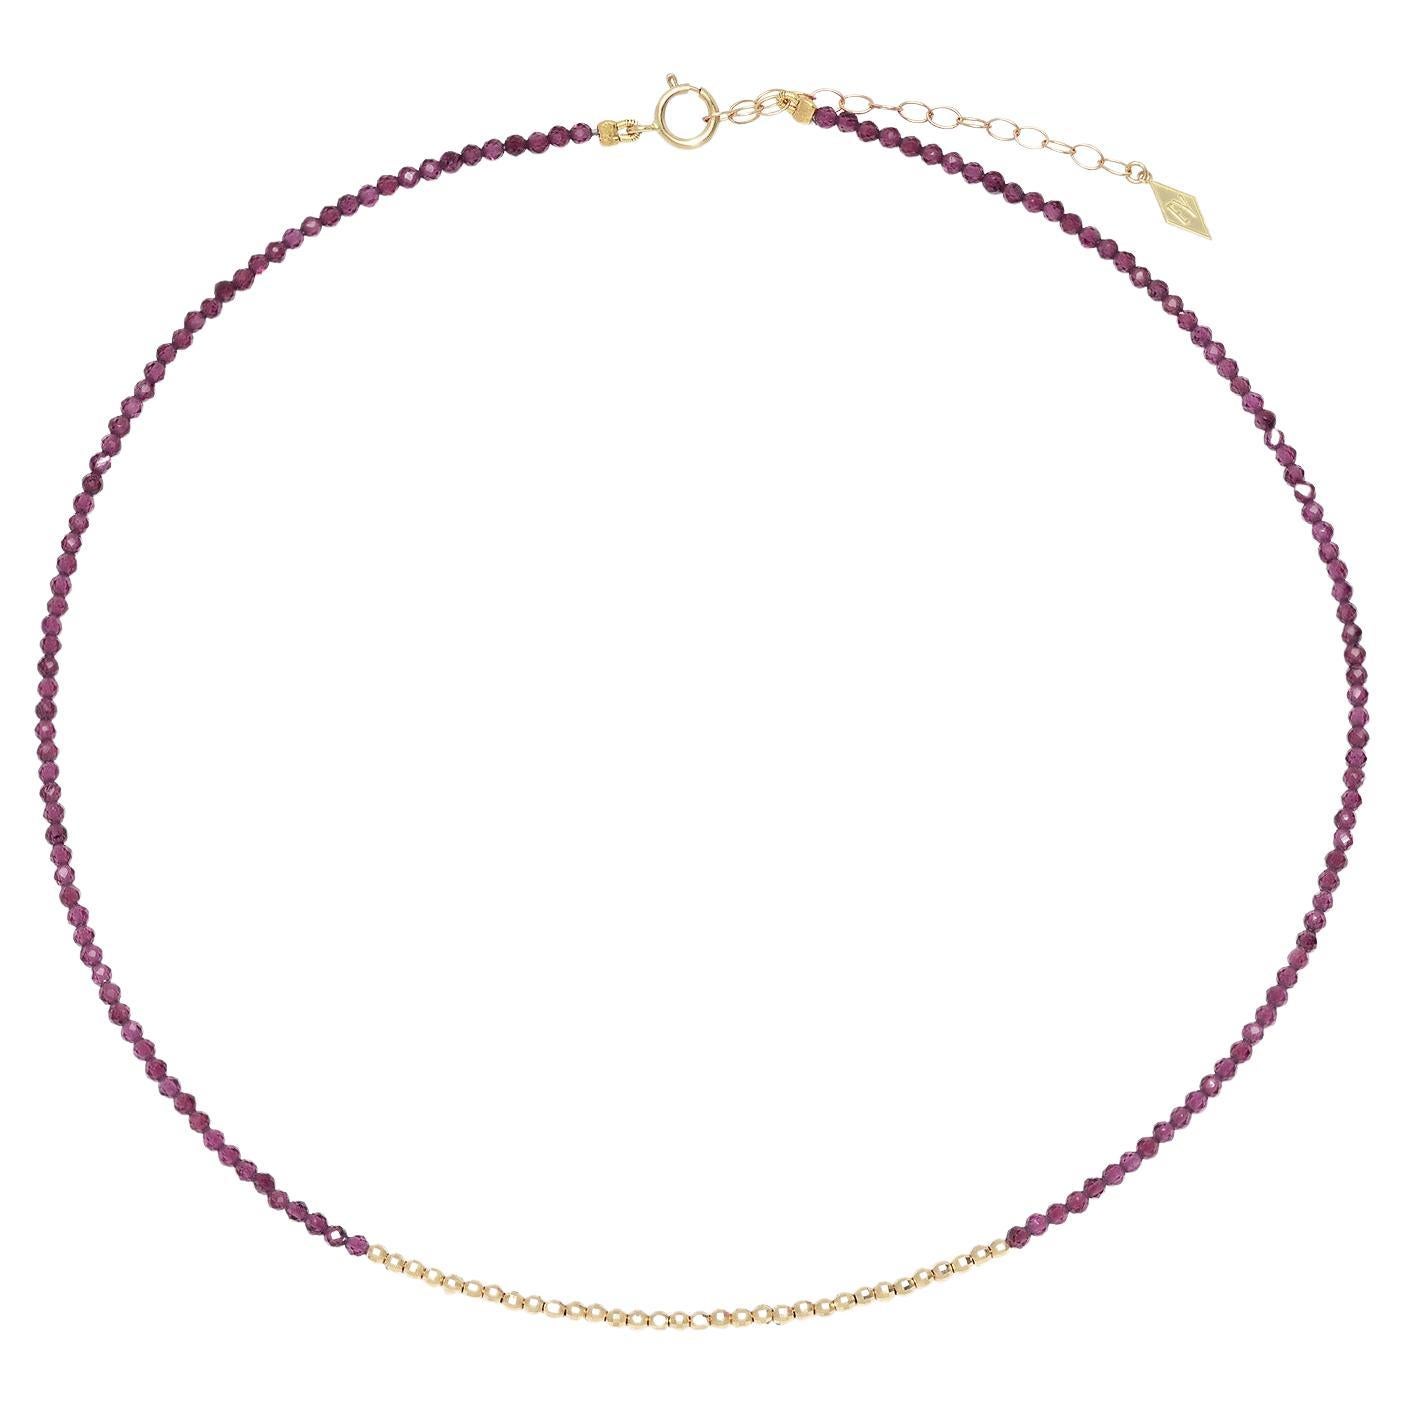 The "Glimmer Choker" with Yellow Gold and Garnet For Sale